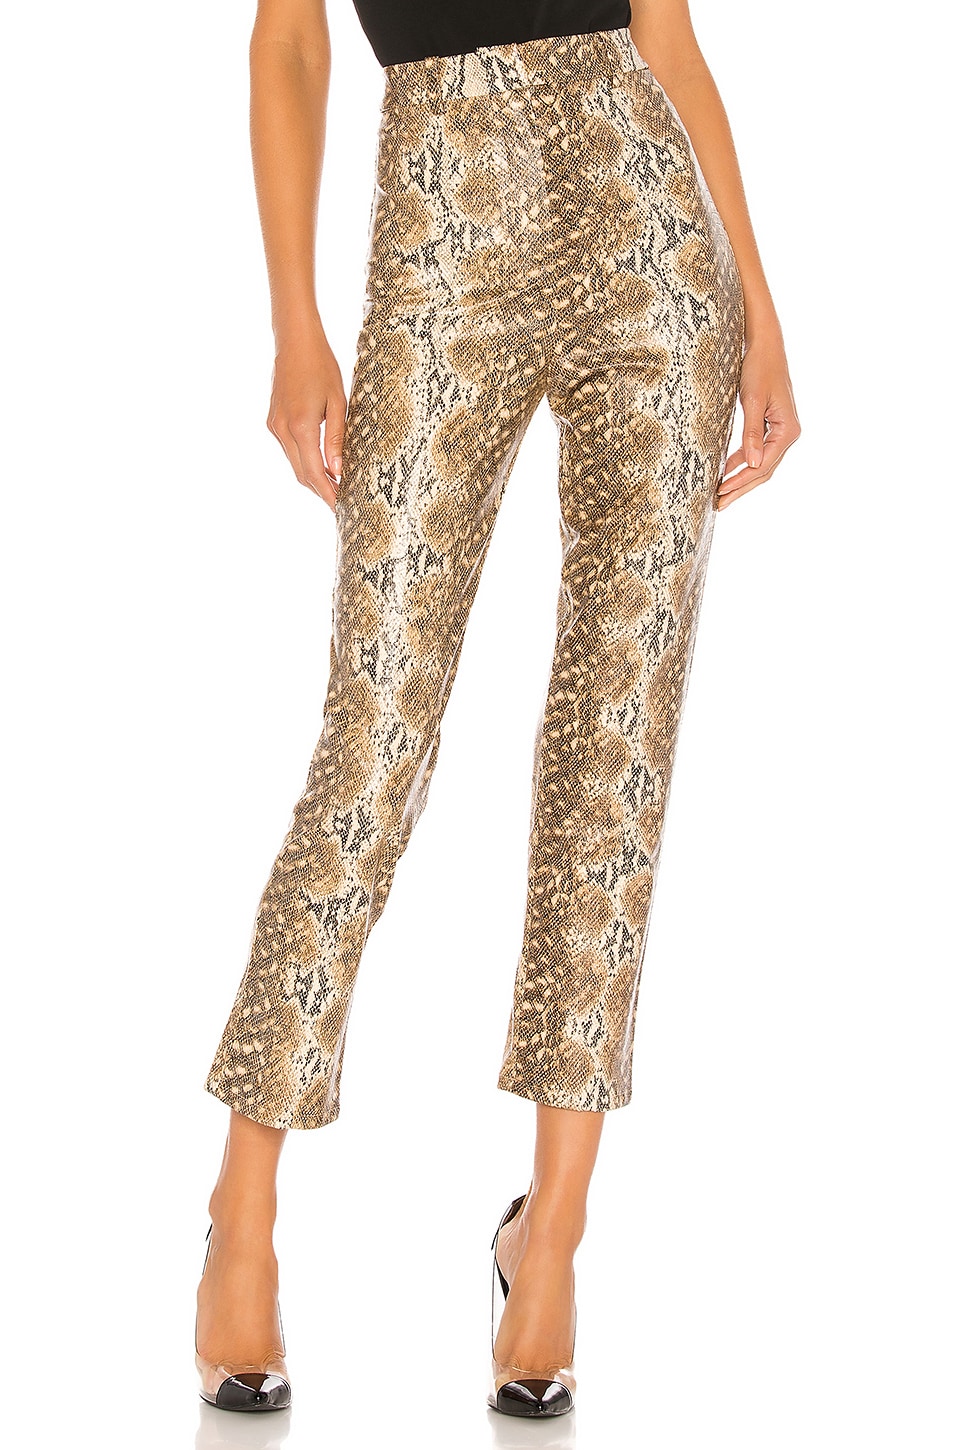 Lovers & Friends Indra Pant In Snake Skin